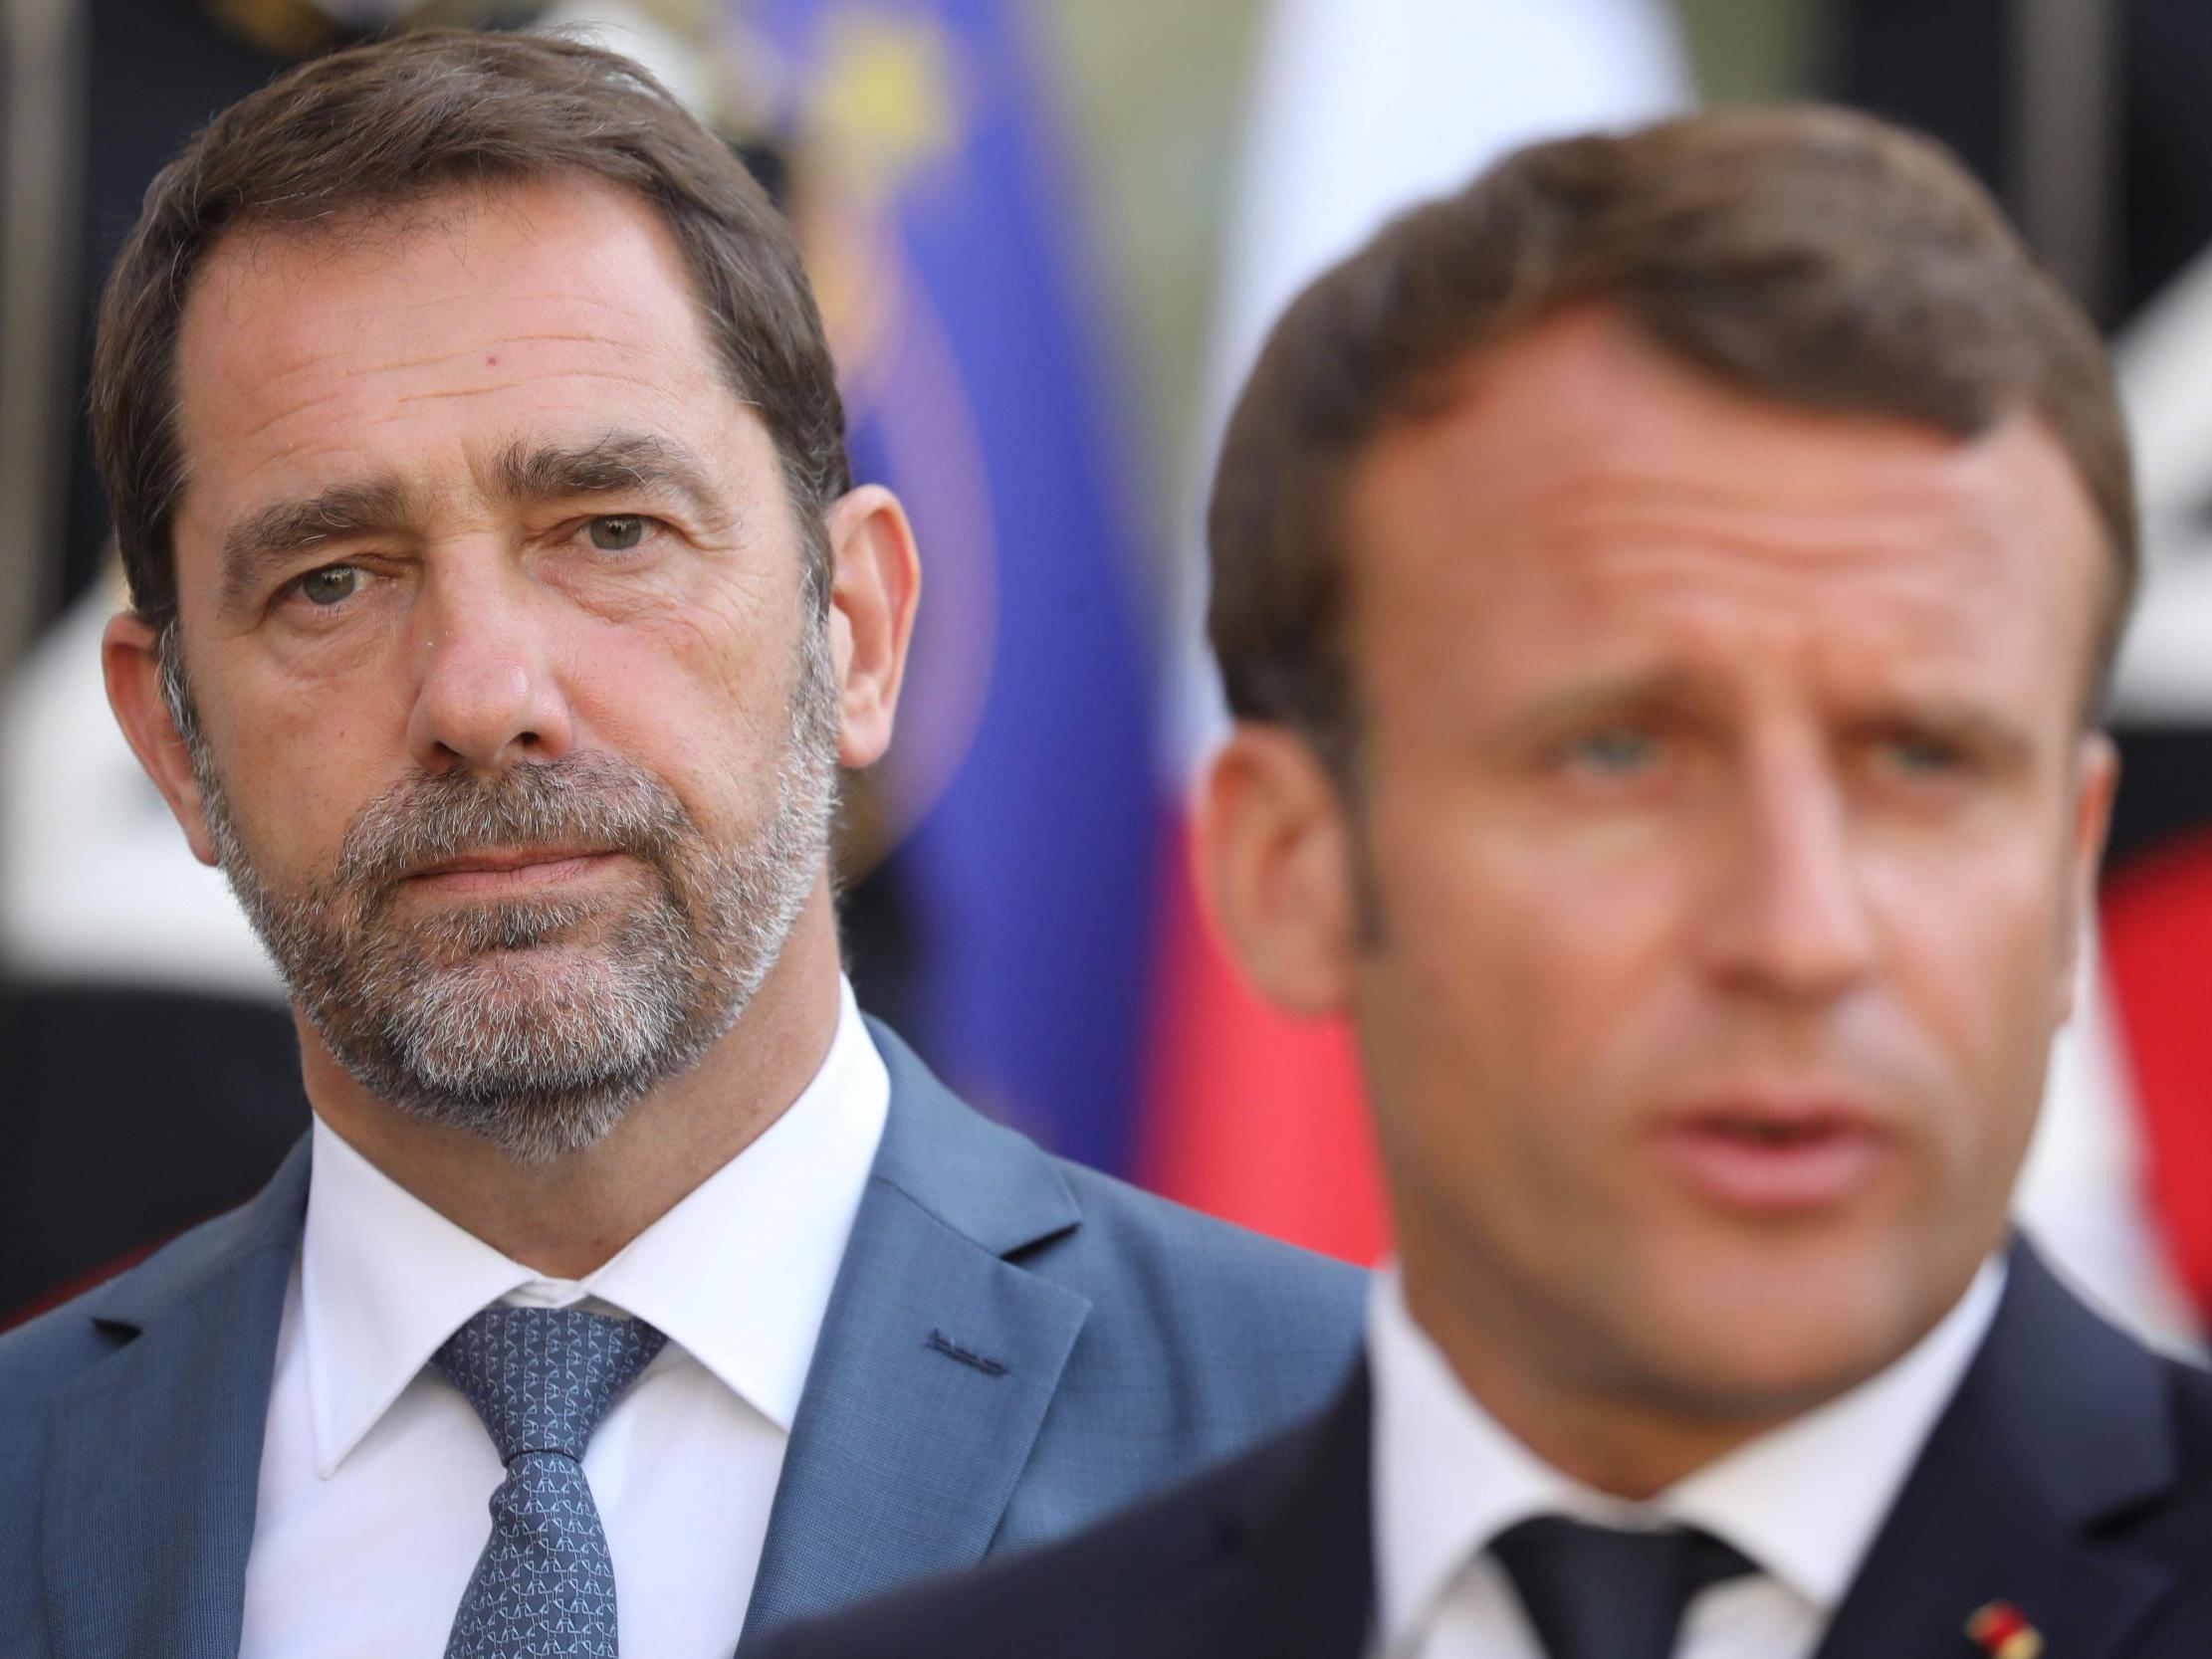 French Interior Minister Christophe Castaner leaves the French Government following a reshuffle by newly nominated Prime Minister